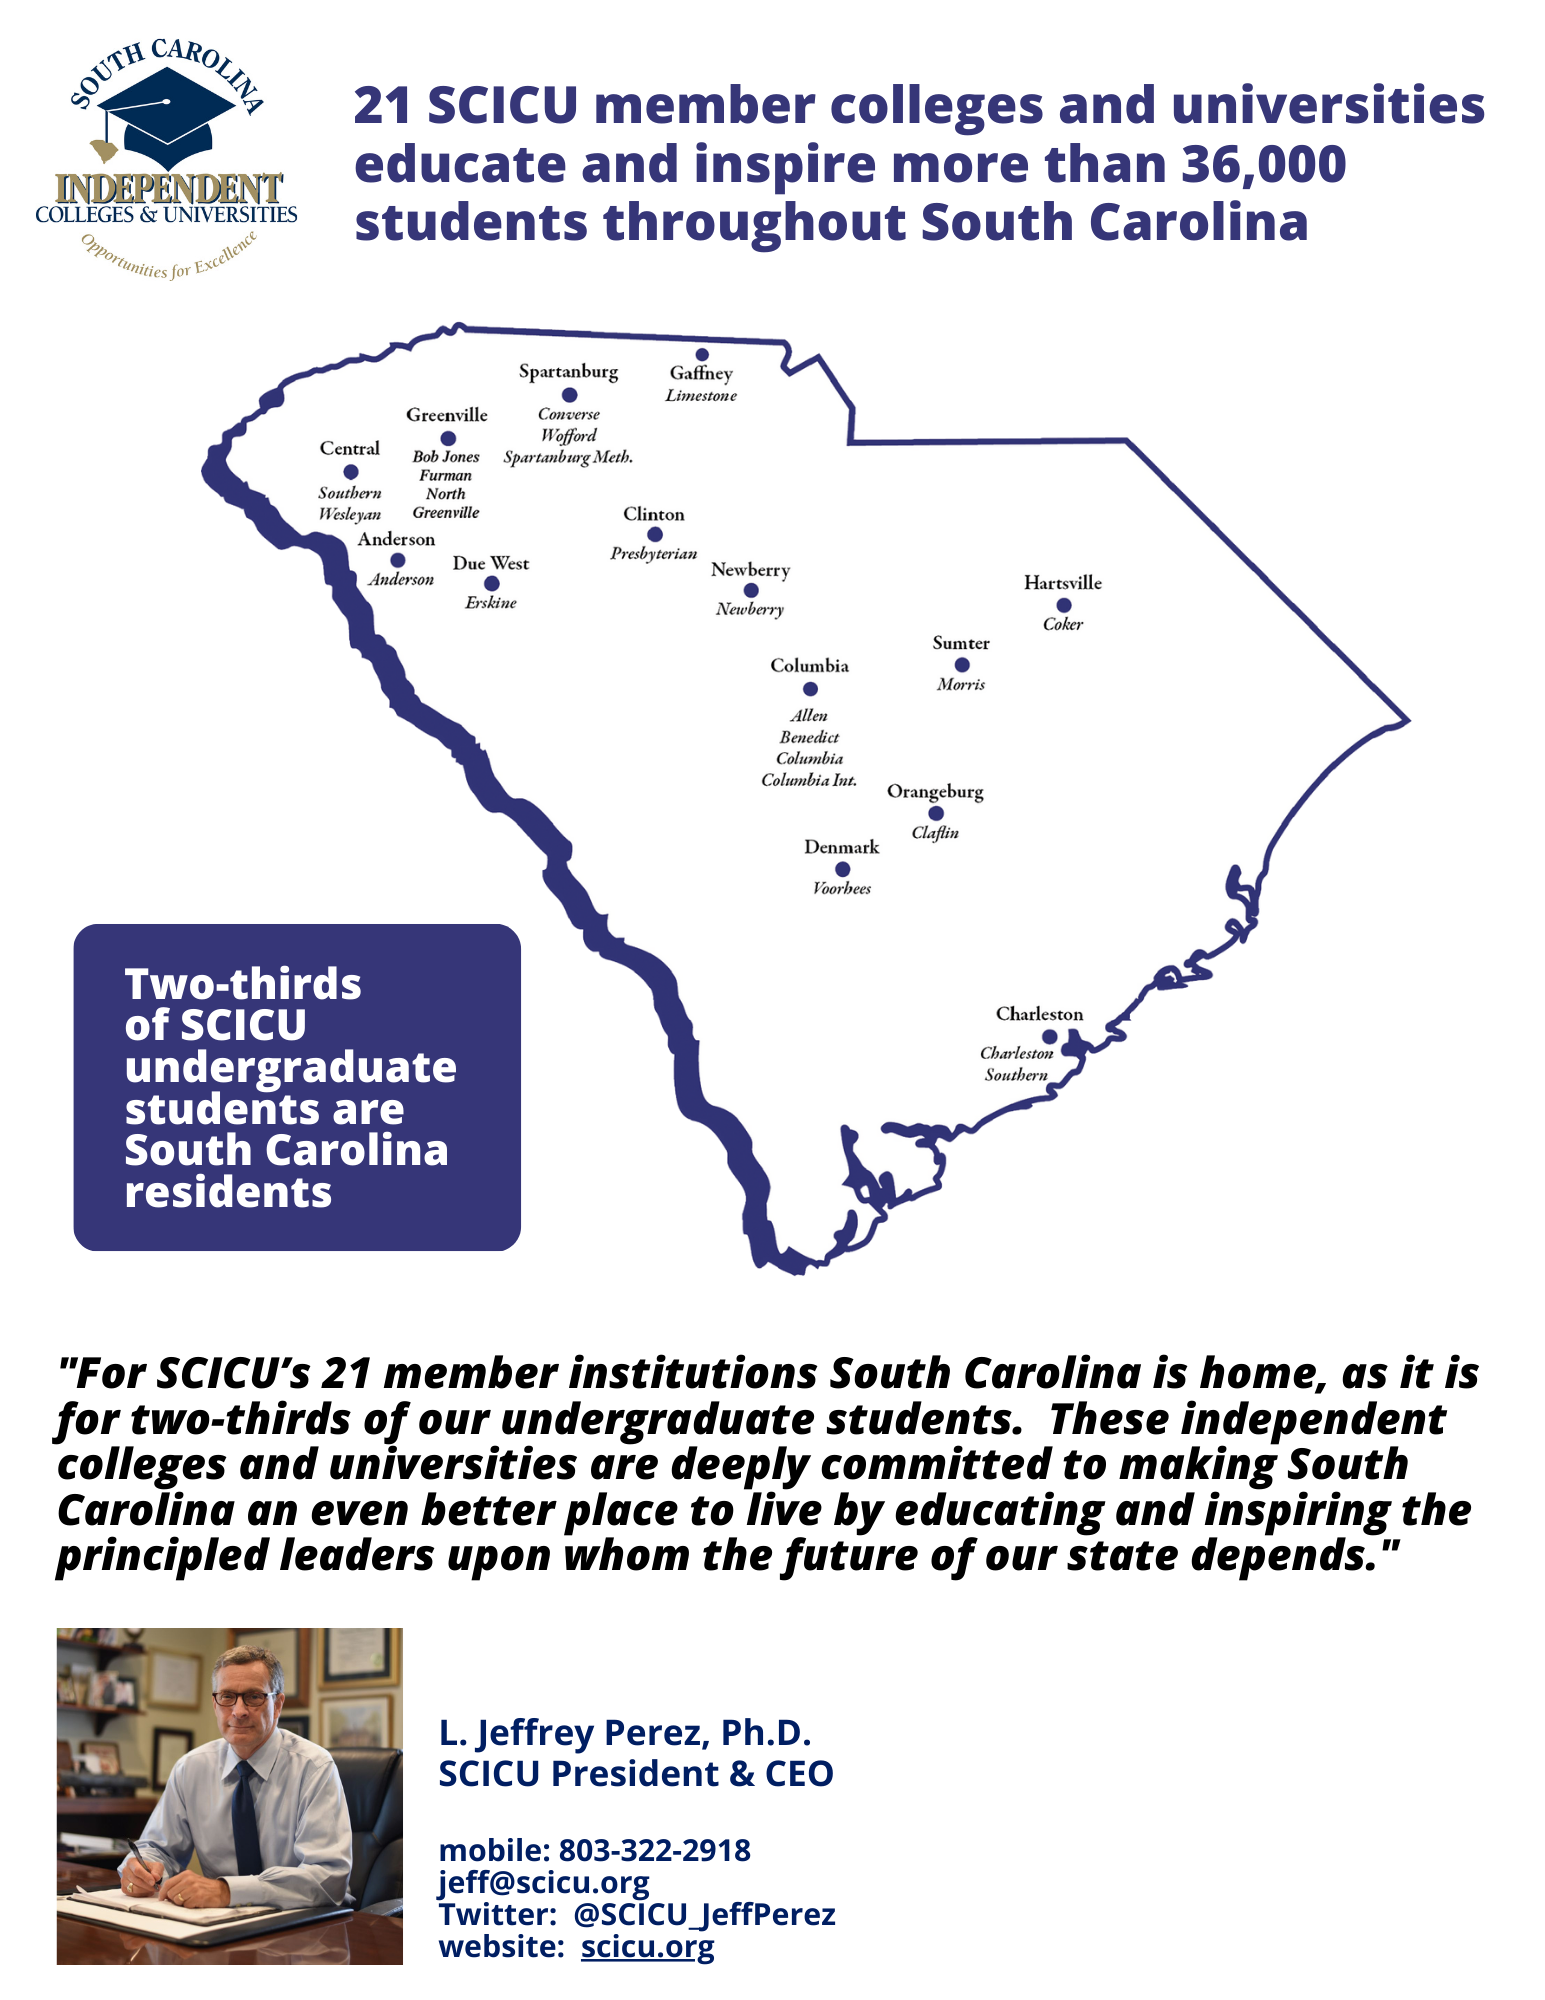 SCICU's 21 member colleges and  universities educate over 36,000 students. Two-thirds of those students are South Carolina residents.